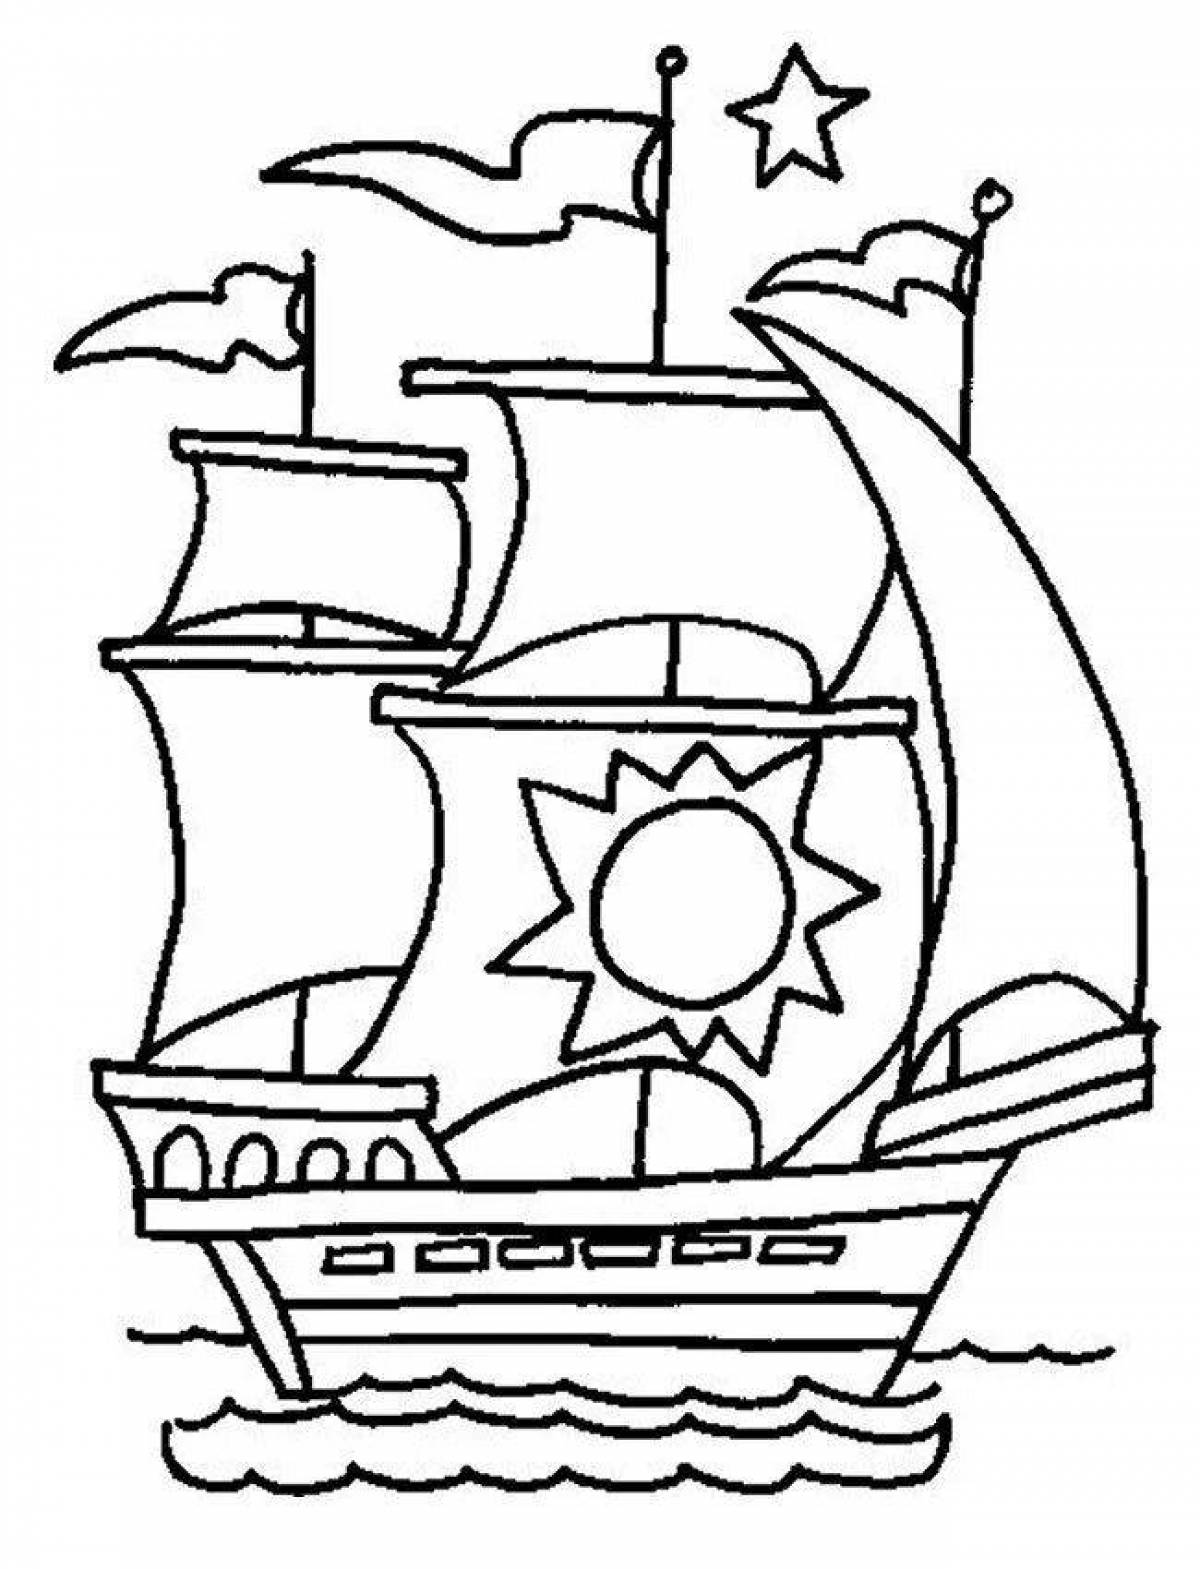 Animated sailboat coloring page for toddlers